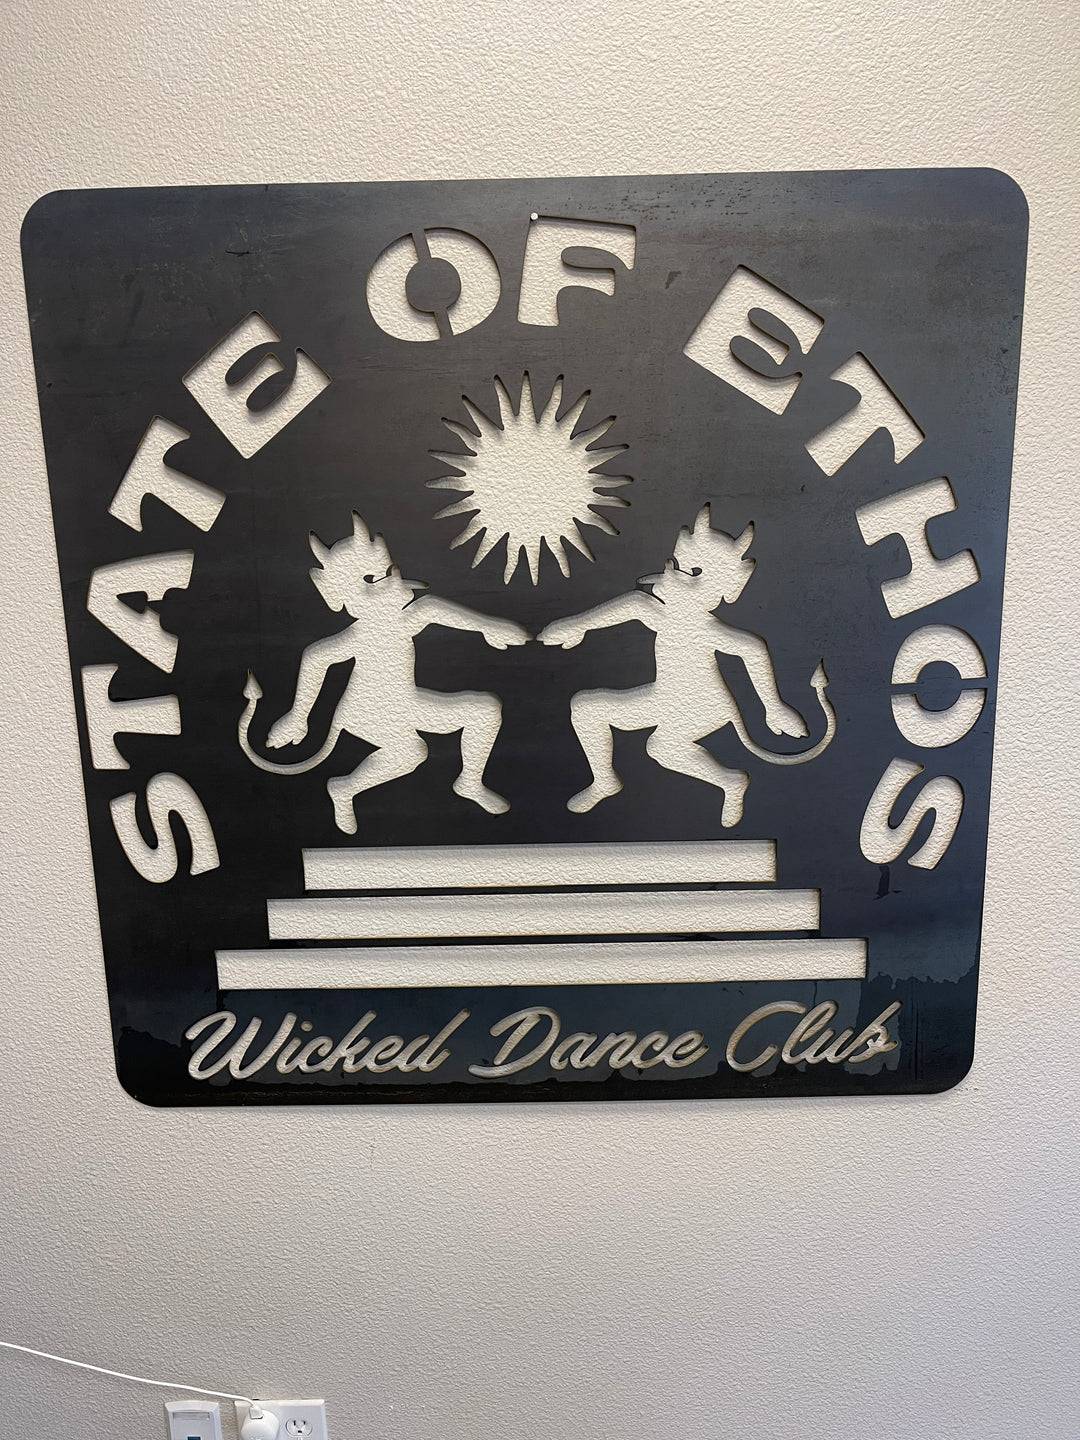 State of Ethos Plate